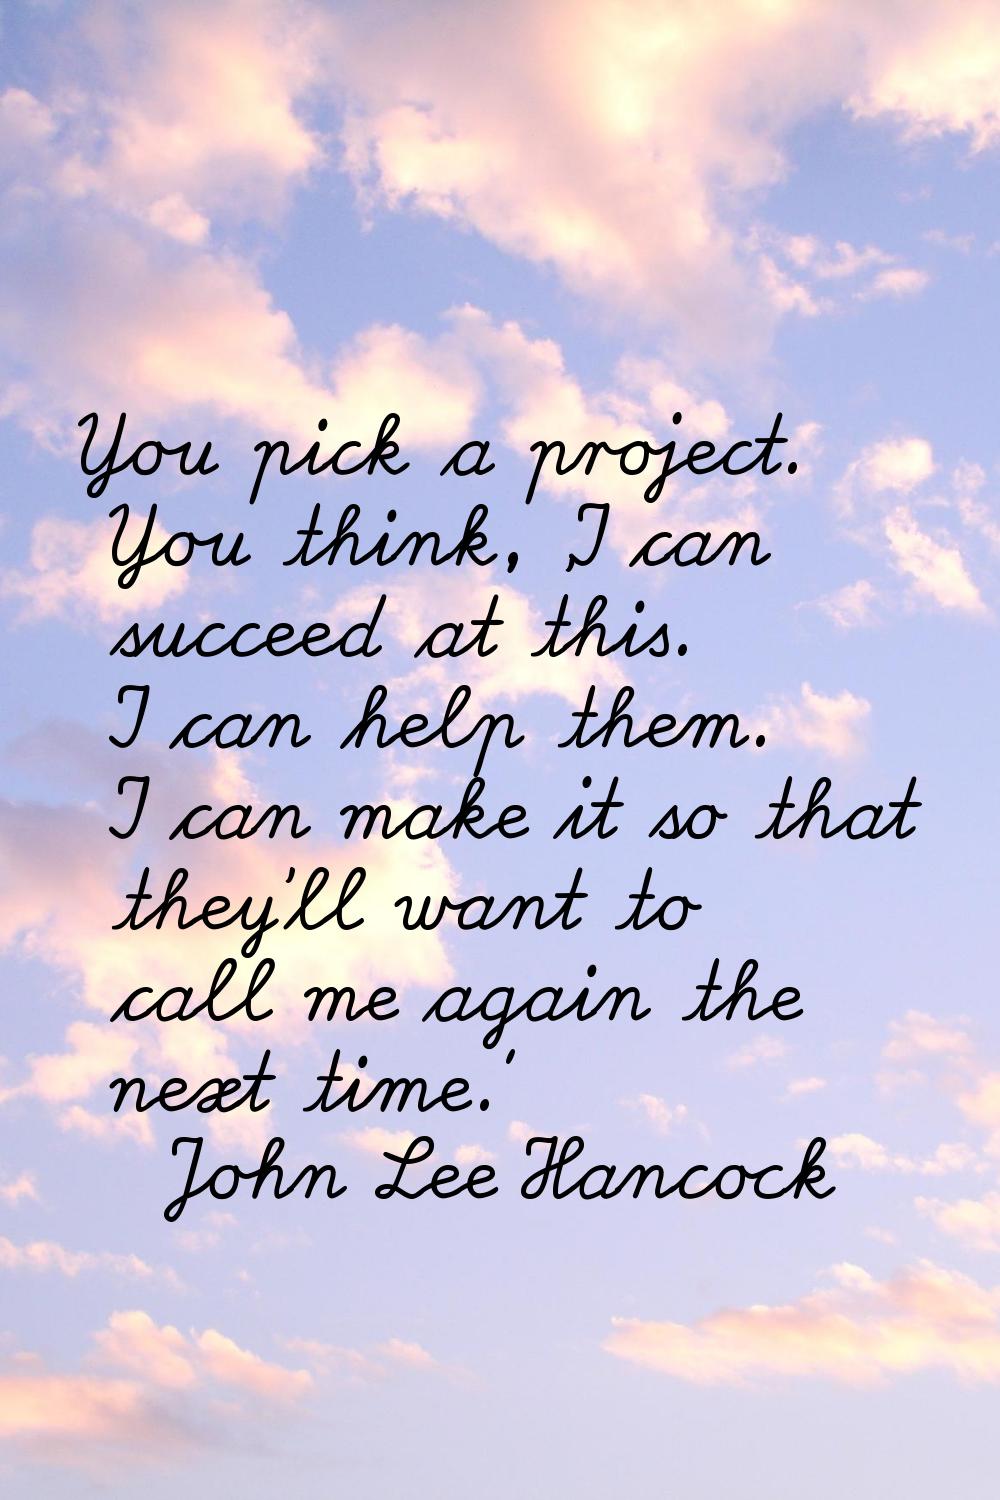 You pick a project. You think, 'I can succeed at this. I can help them. I can make it so that they'